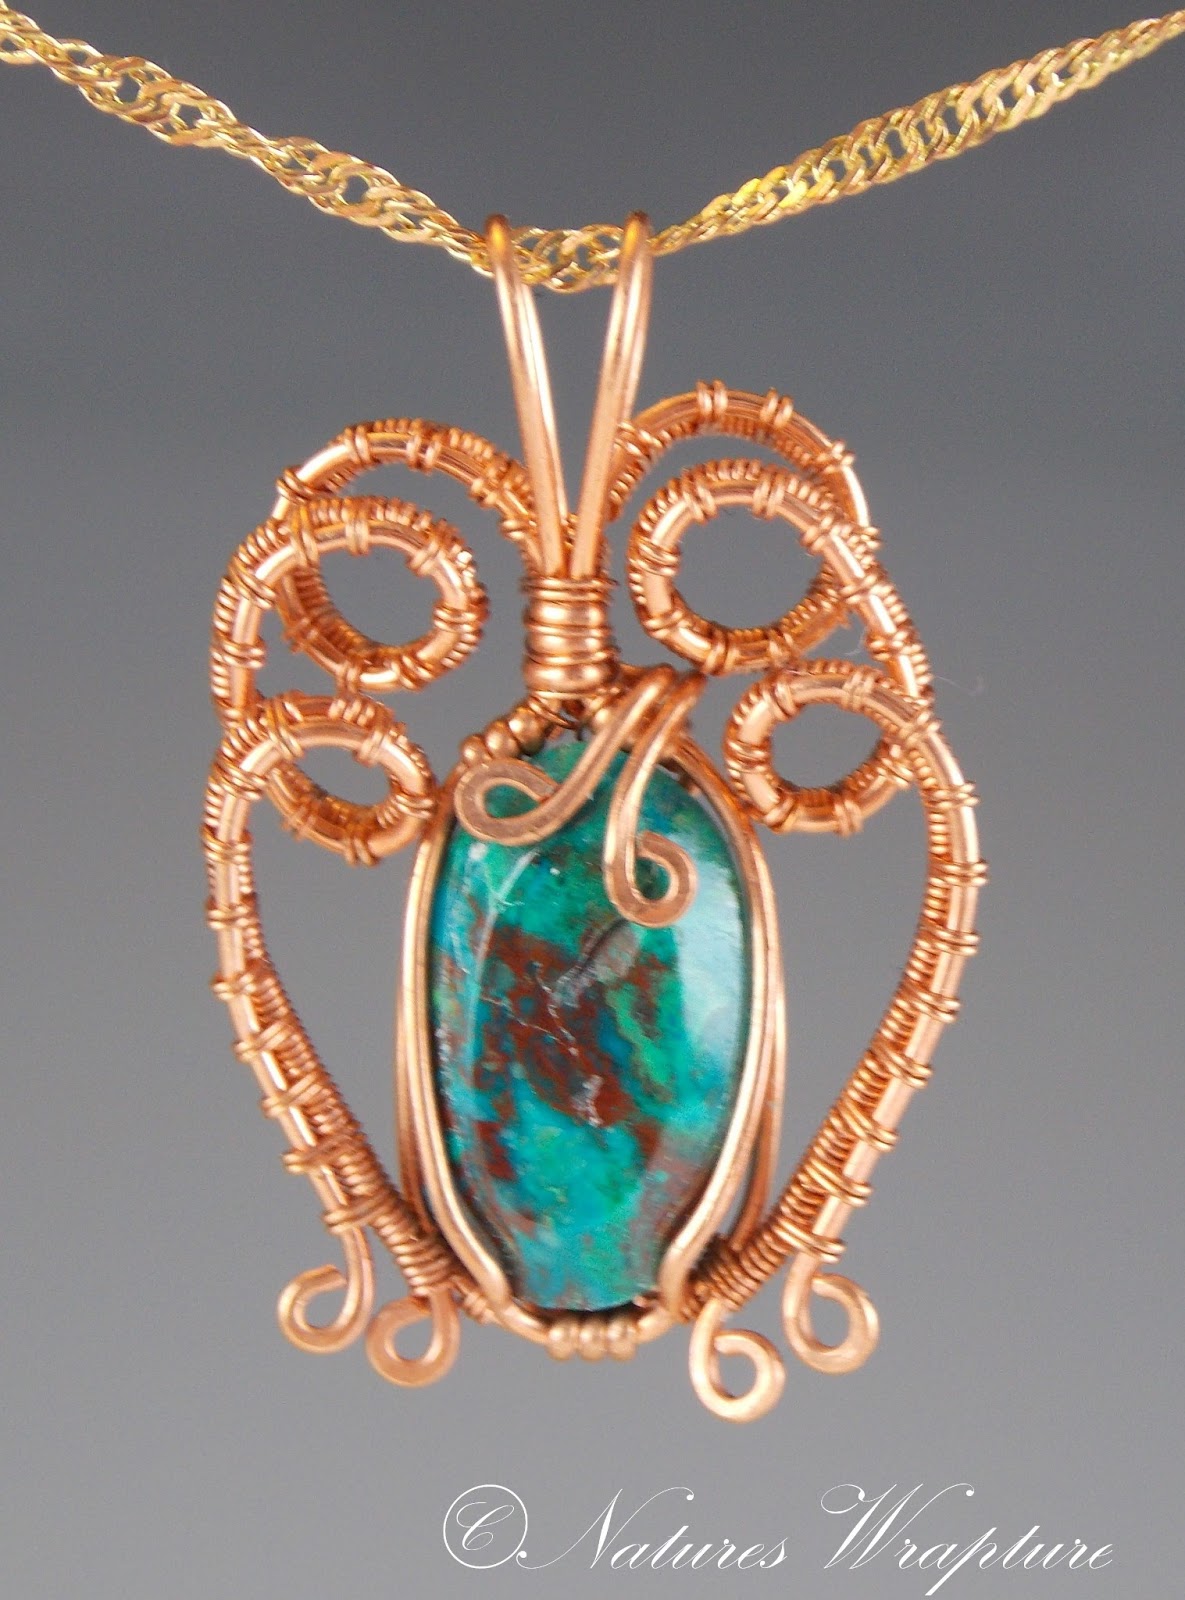 NaturesWrapture: Care and Cleaning of Handmade Copper Jewelry